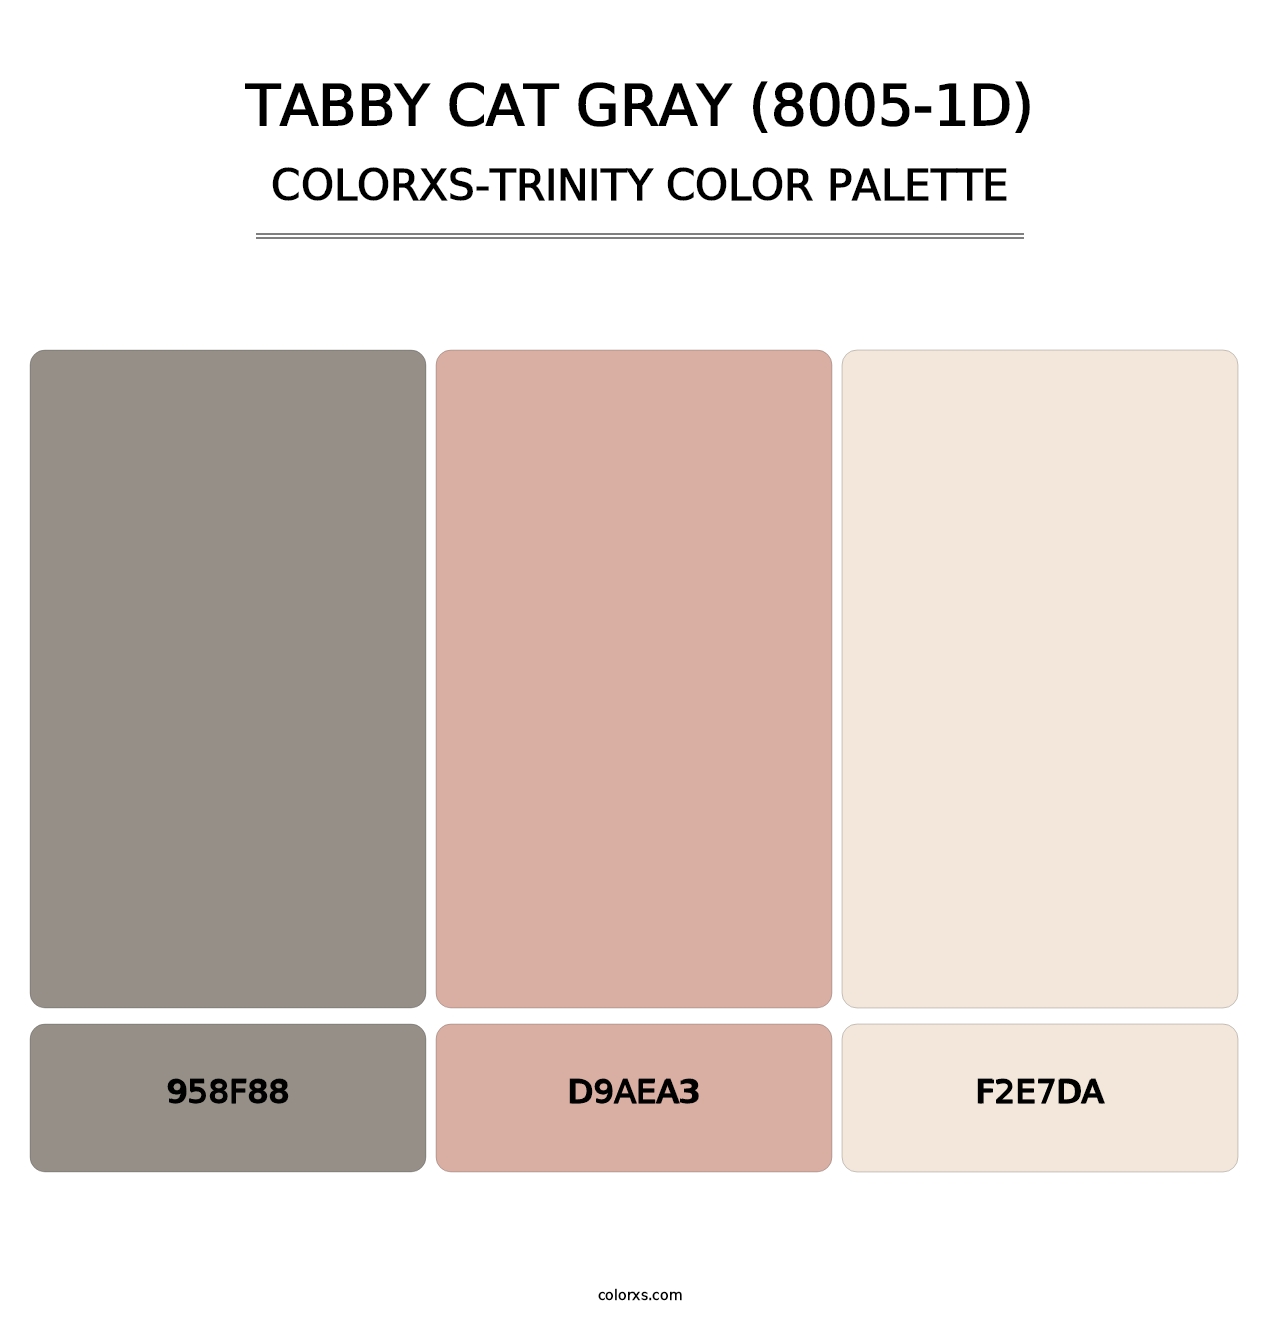 Tabby Cat Gray (8005-1D) - Colorxs Trinity Palette